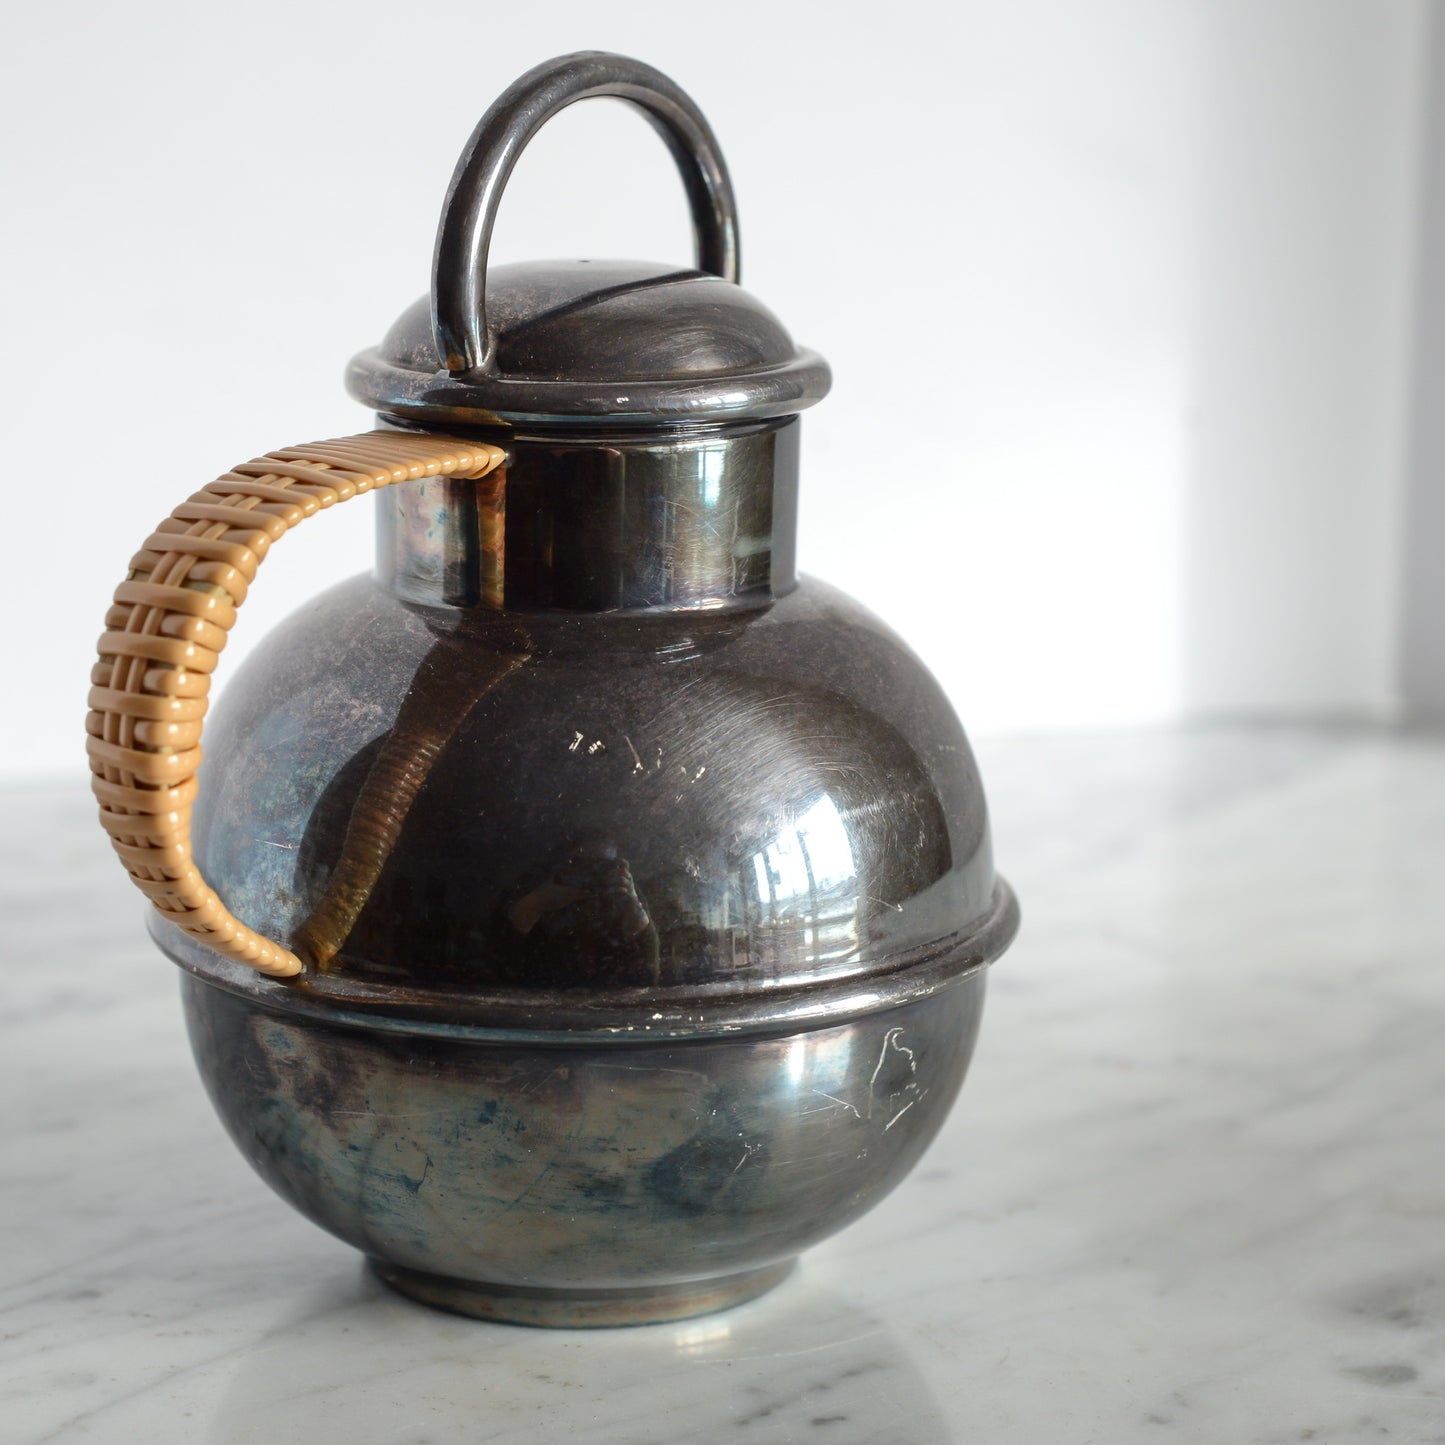 Vintage Silver Teapot with Wrapped Handle